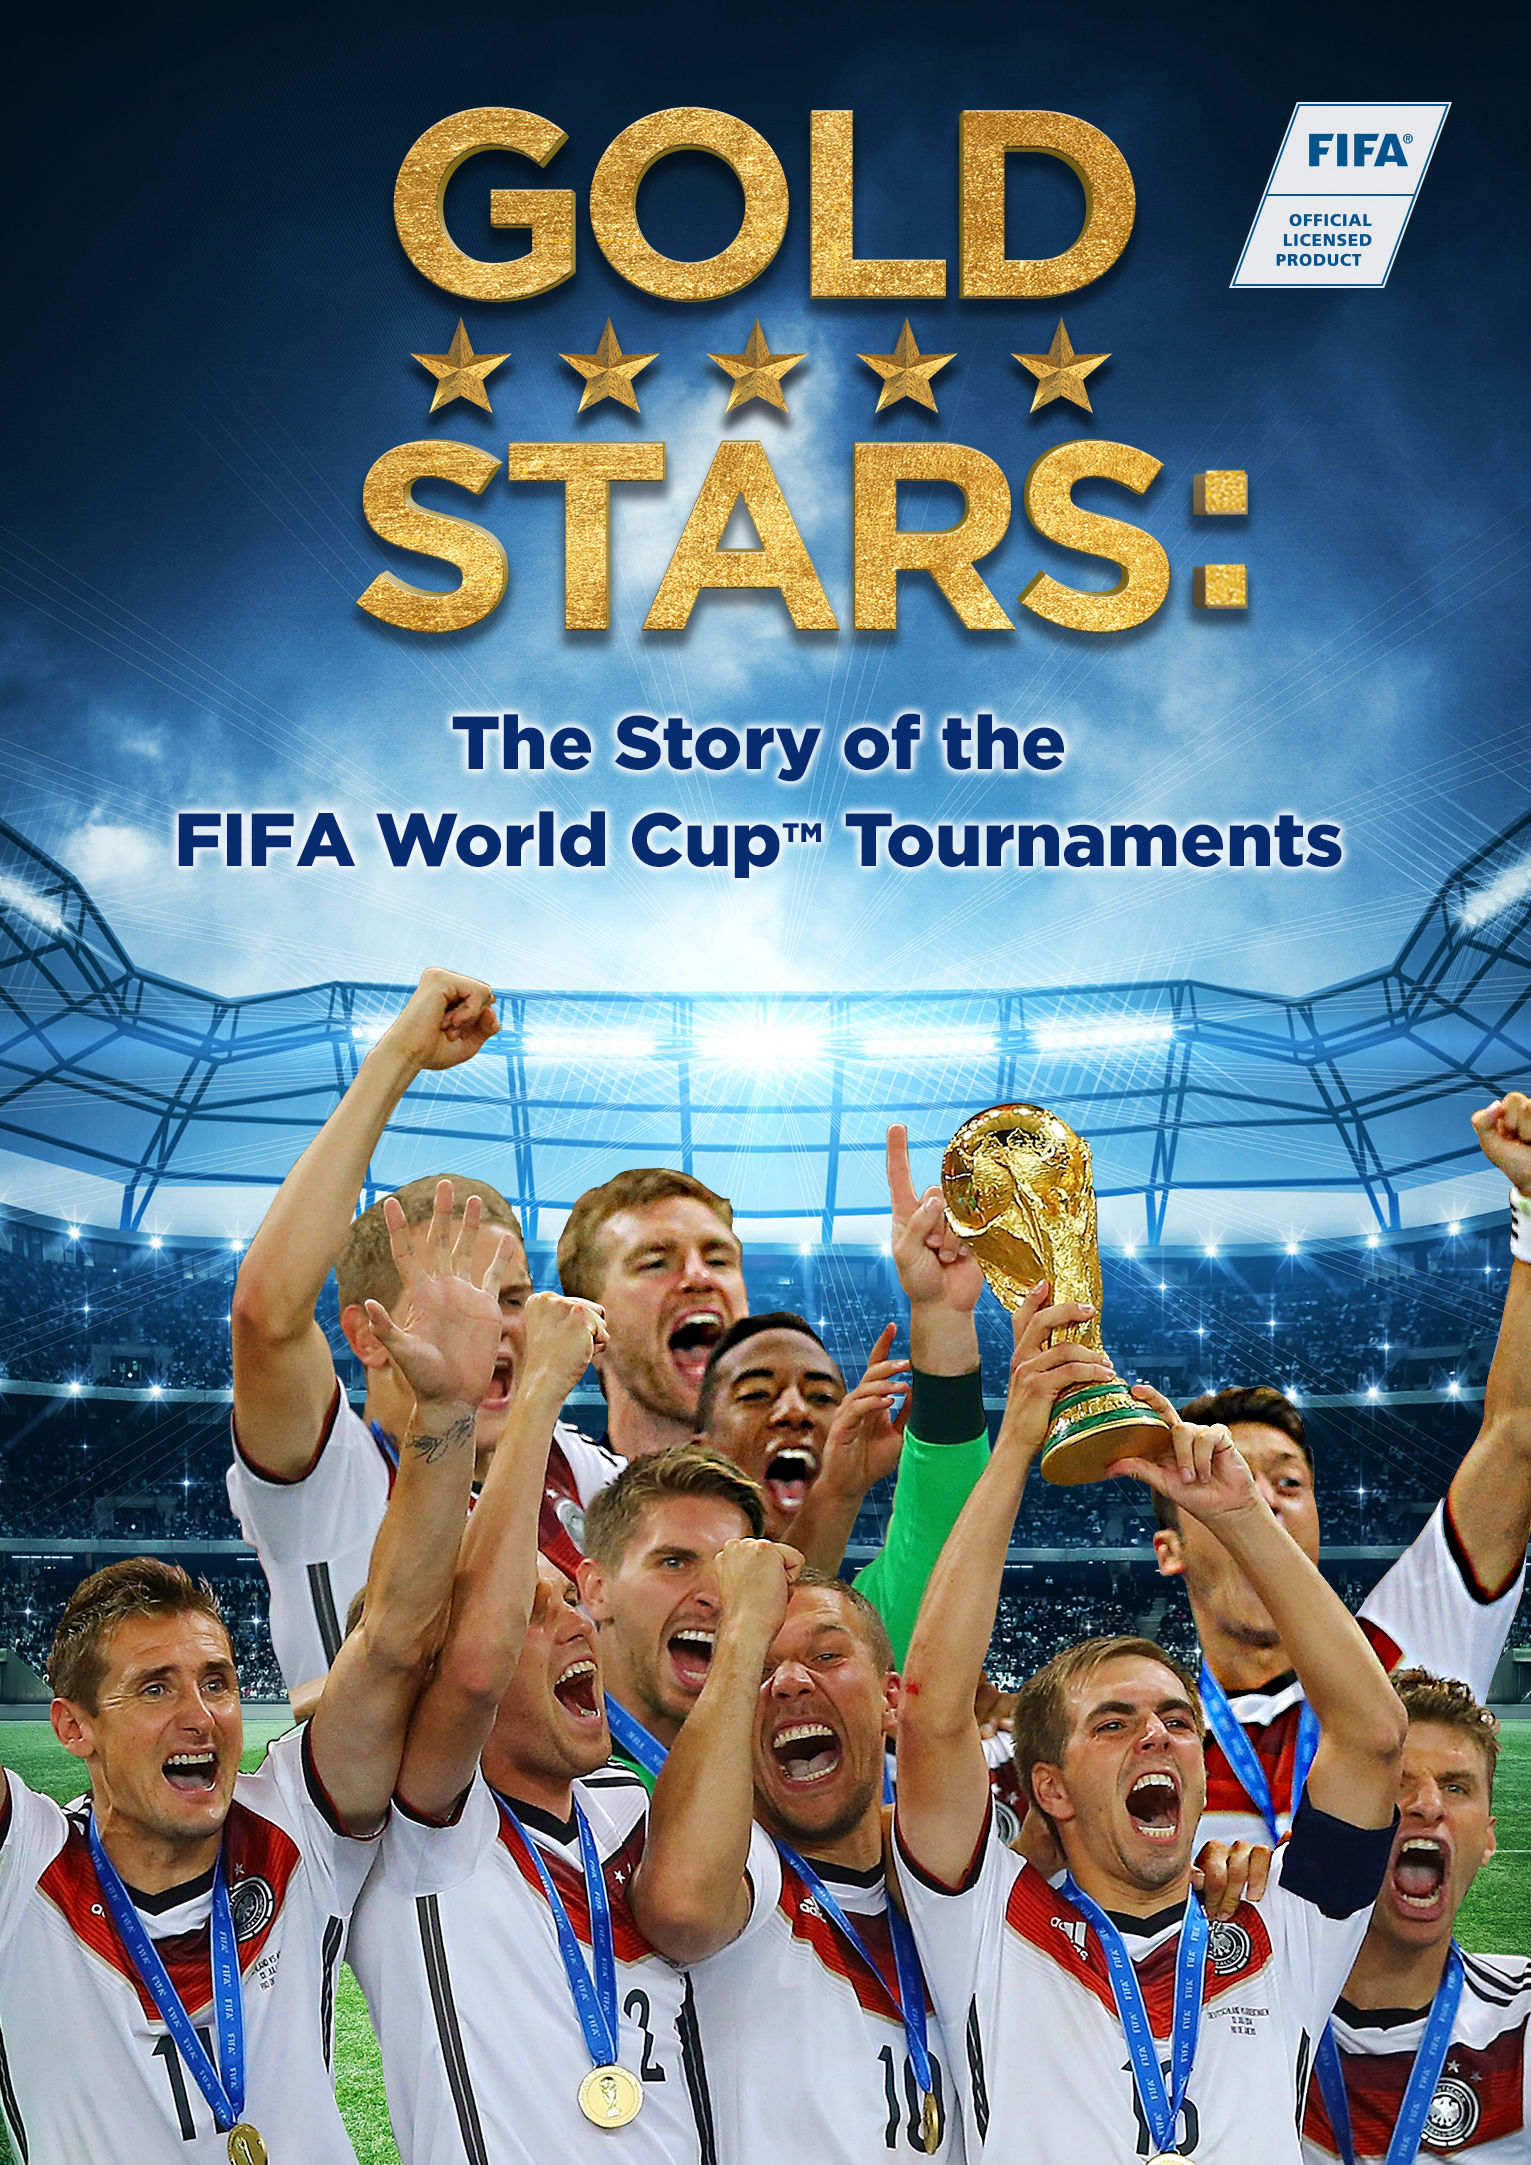 Gold Stars: The Story of the FIFA World Cup Tournaments ne zaman